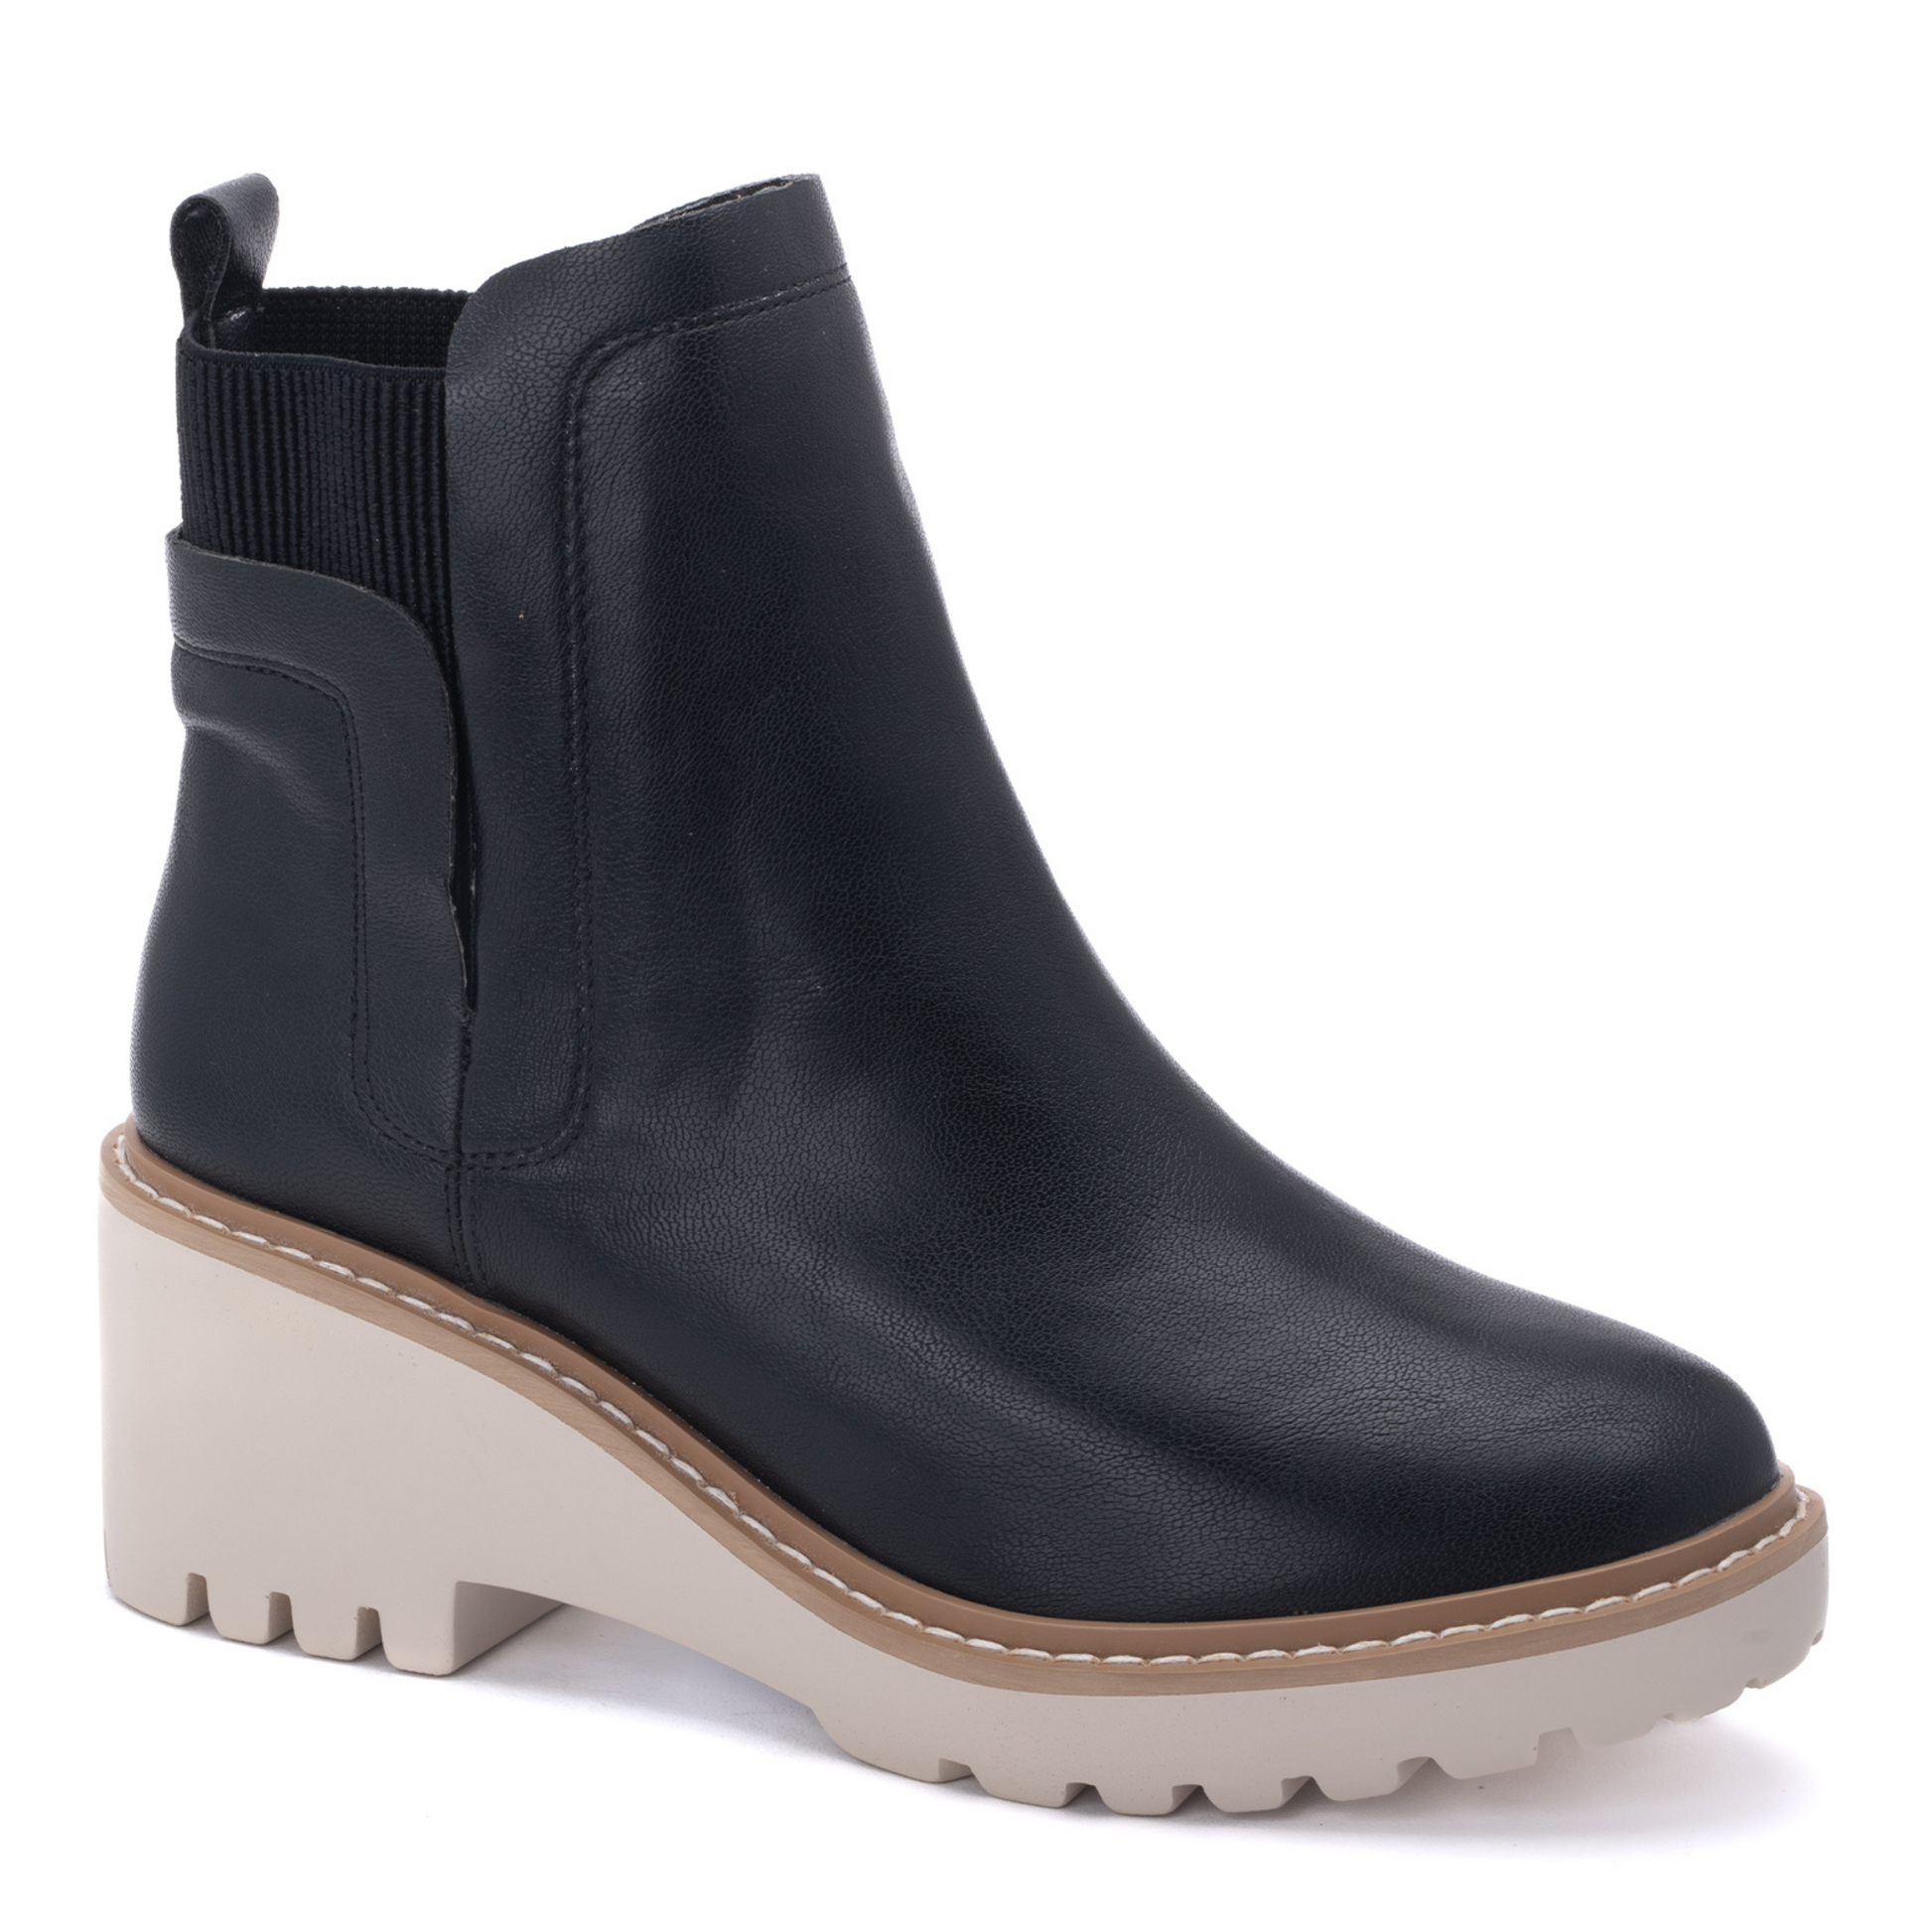 Step out in classic style with the Basic bootie from Corky's. This timeless ankle boot features a sophisticated black faux leather finish, making it the perfect choice for day or night. Versatile and stylish, you can pair the Basic bootie with jeans or a dress – the choice is yours.